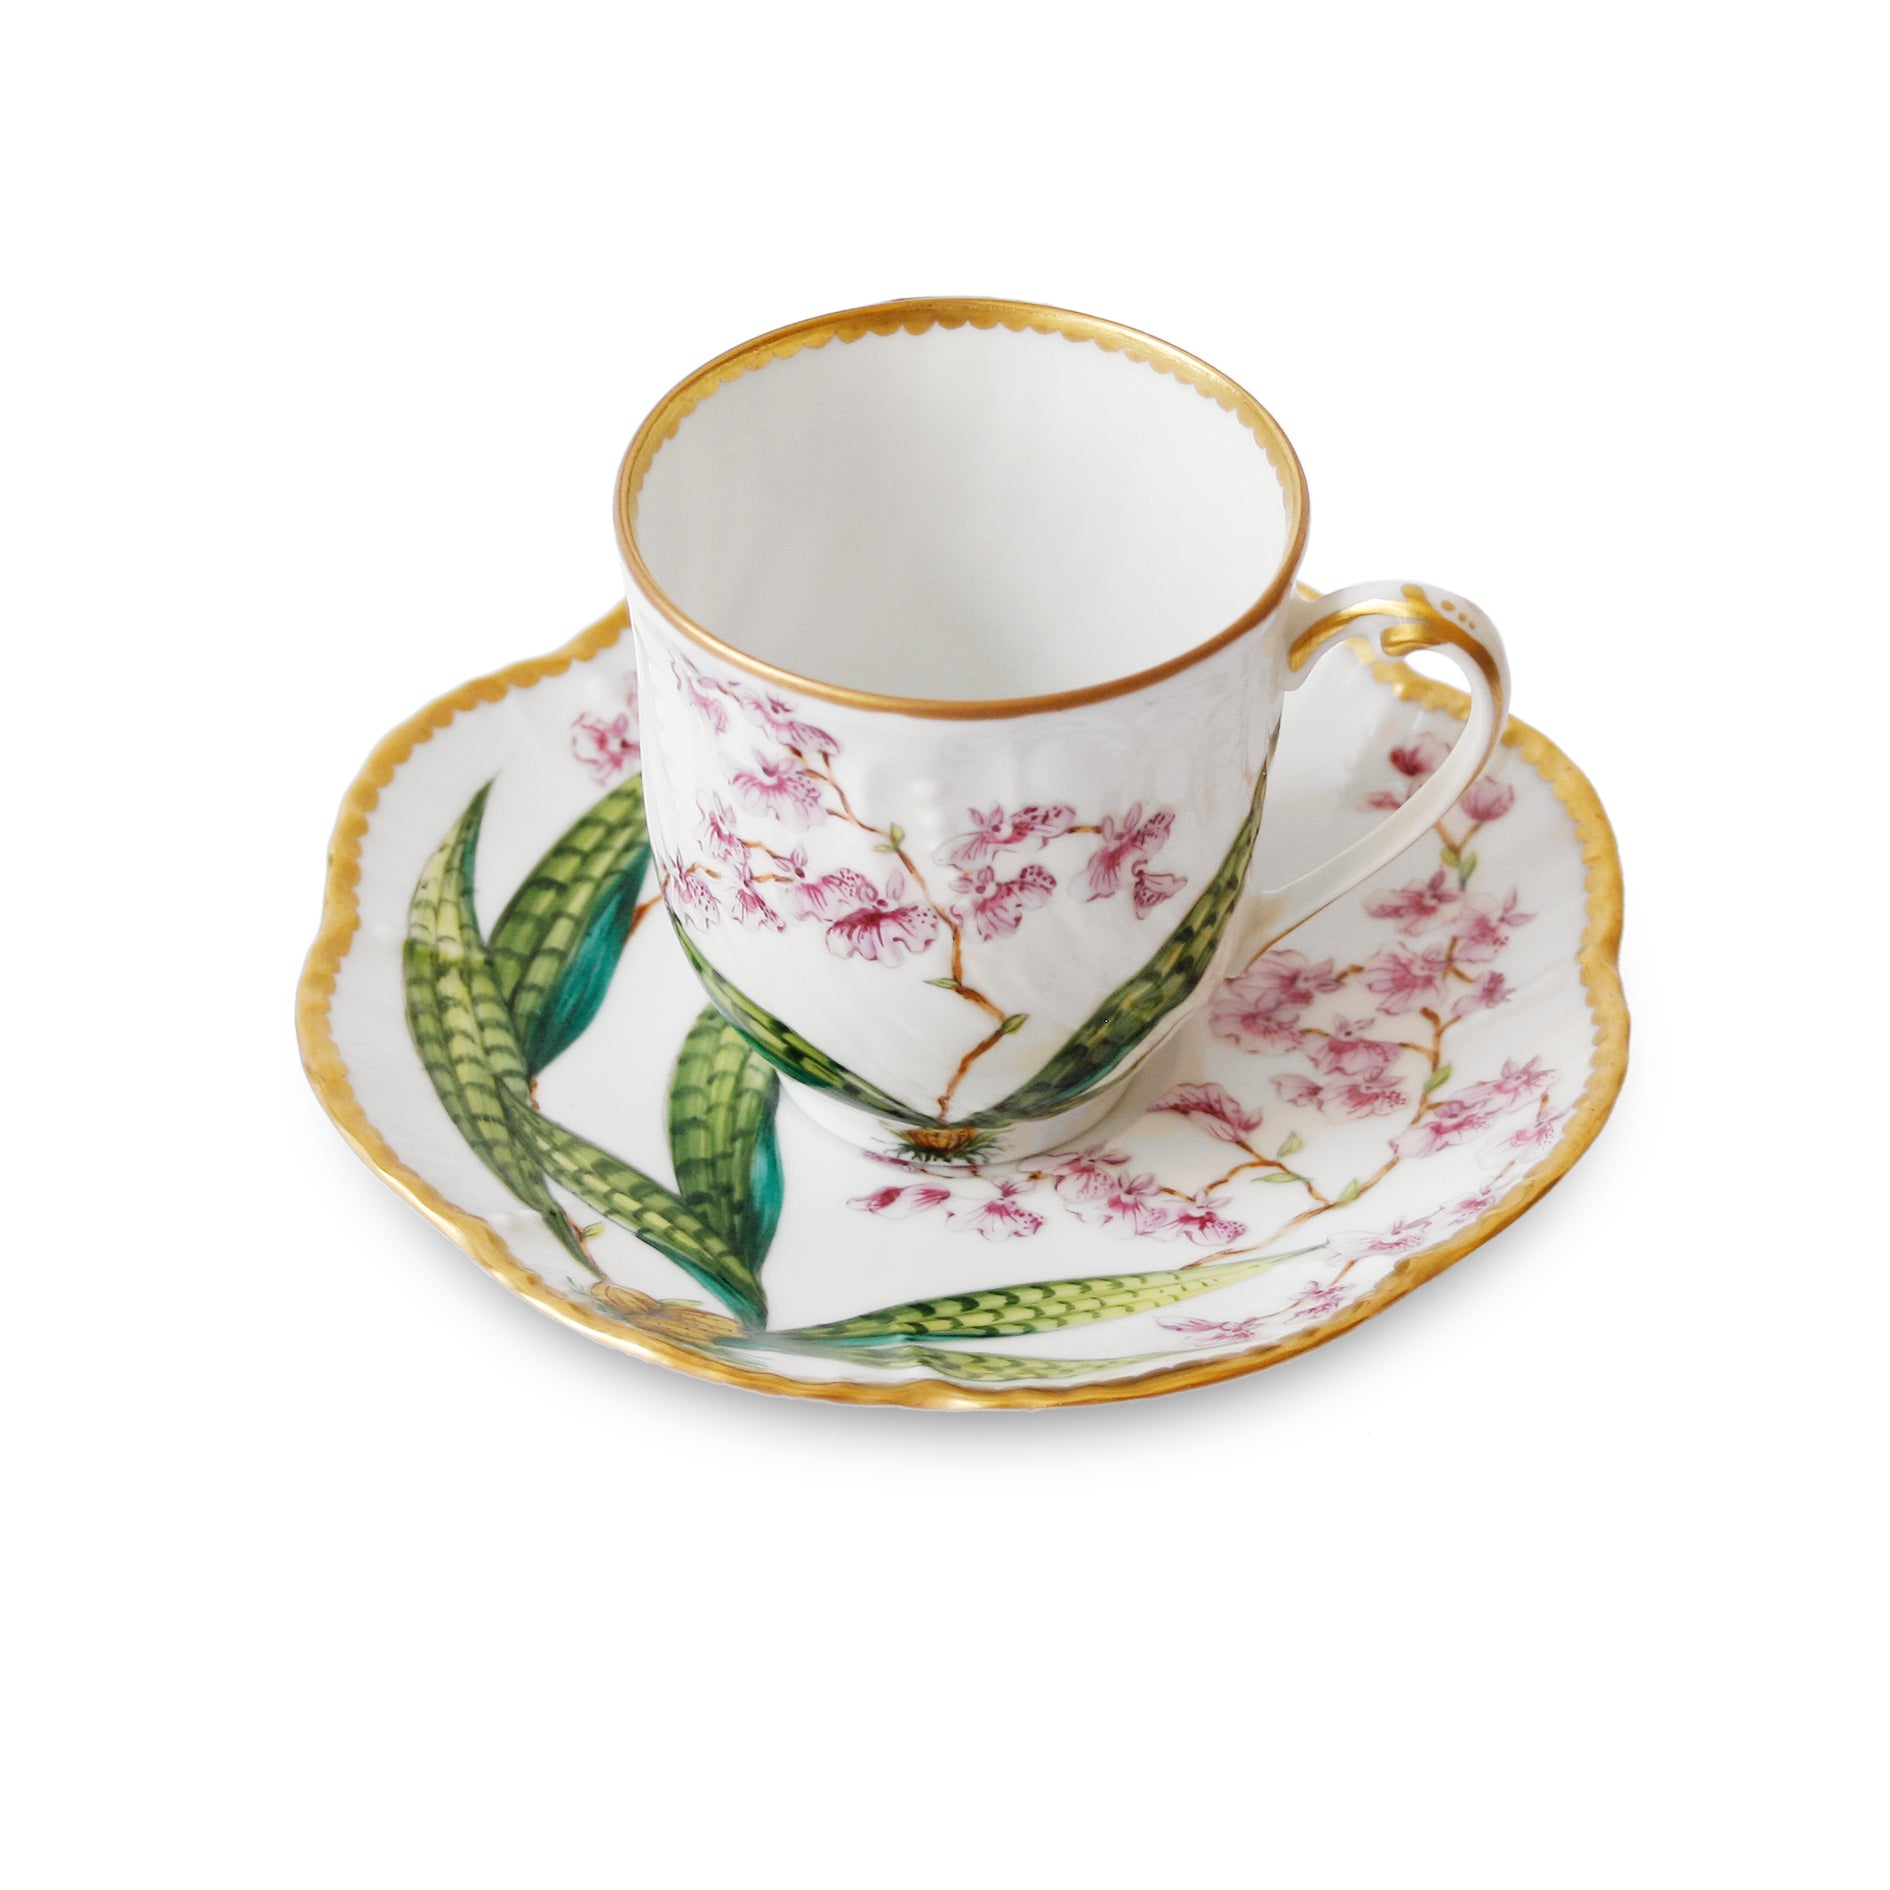 Histoires d'Orchidées - Coffee cup and saucer
